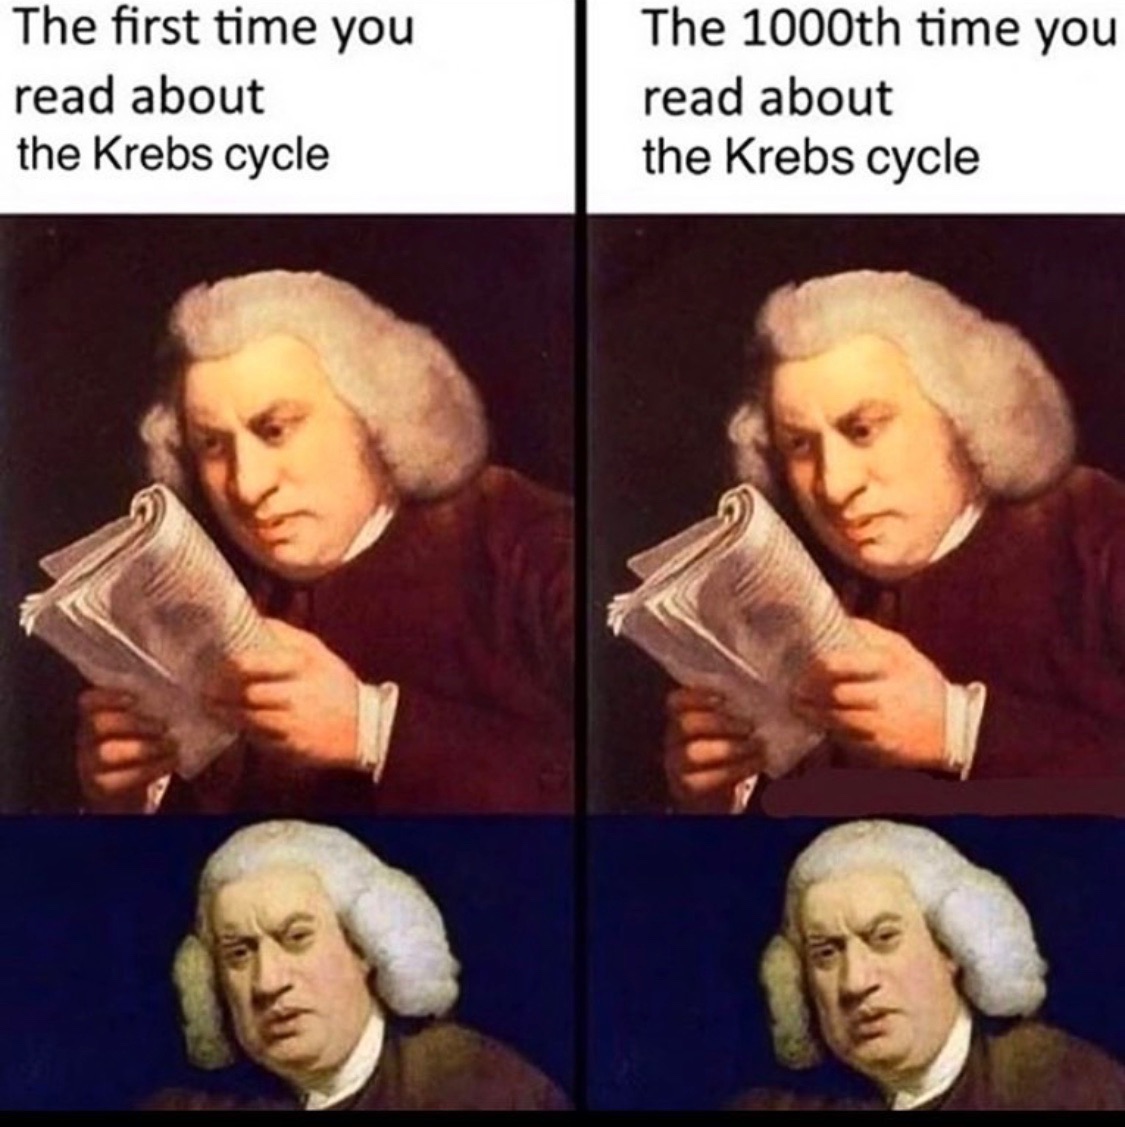 first time you read about the krebs cycle - The first time you read about the Krebs cycle The 1000th time you read about the Krebs cycle